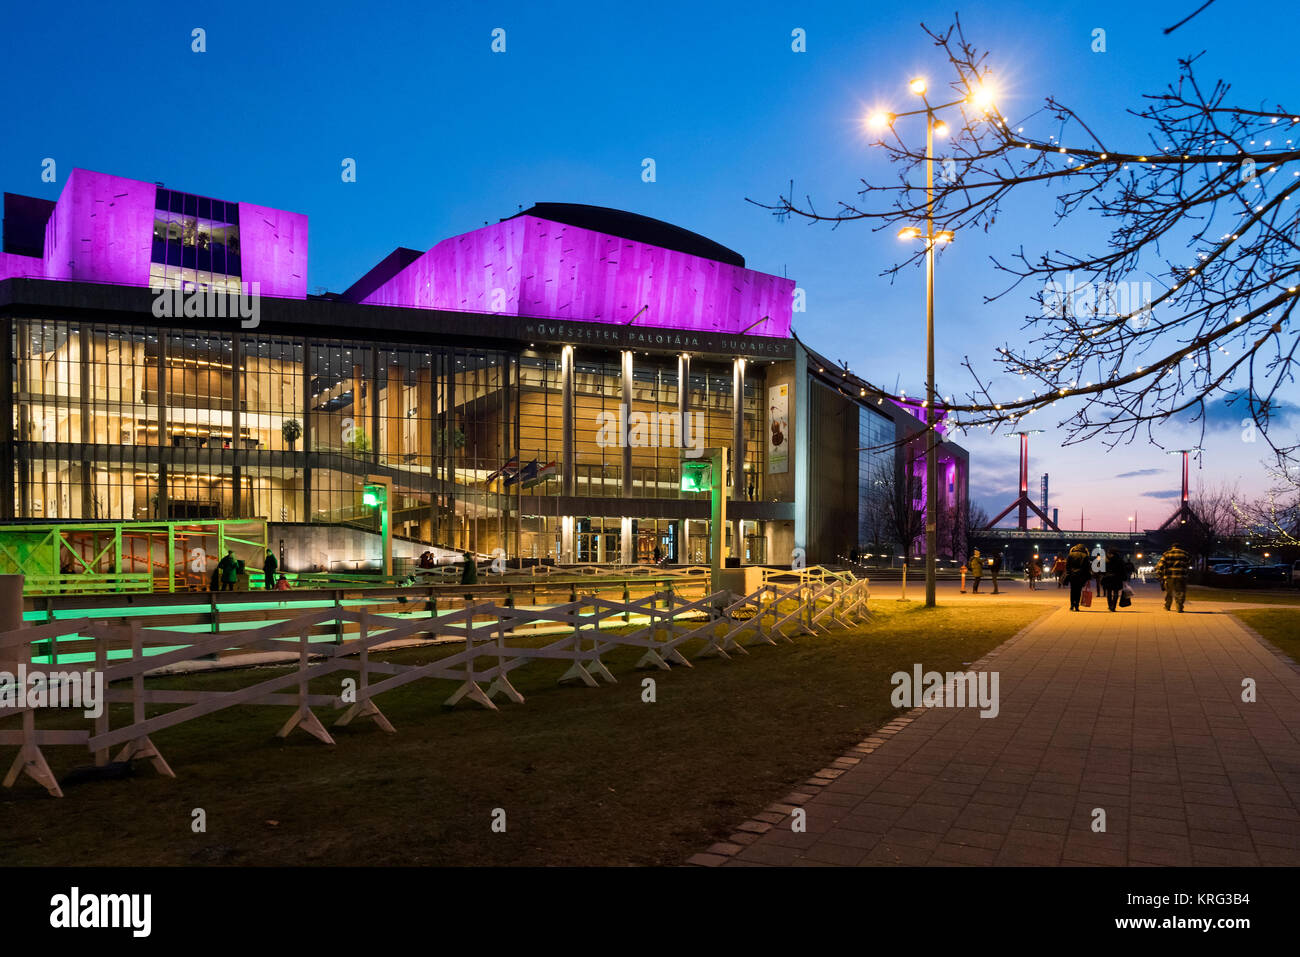 Mupa Budapest Cultural and Art Center at sunset, Budapest, Hungary Stock Photo